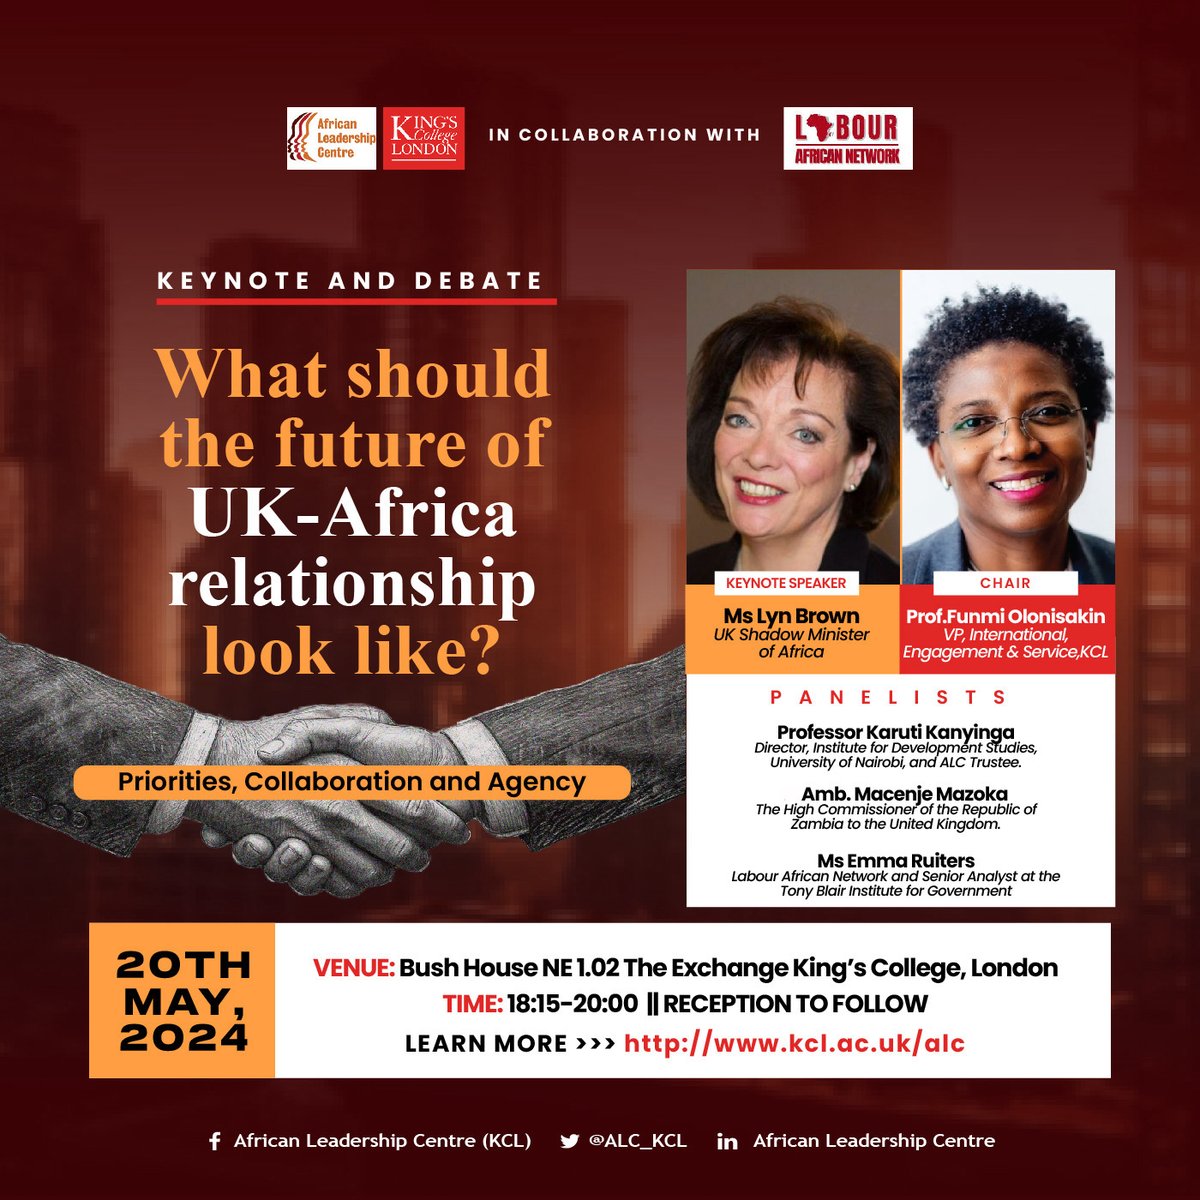 Join us for this timely exchange on the future of UK-Africa relations featuring @lynbrownmp, UK Shadow Minister for Africa & a panel of esteemed experts. 🔗 Register now: shorturl.at/crwL5